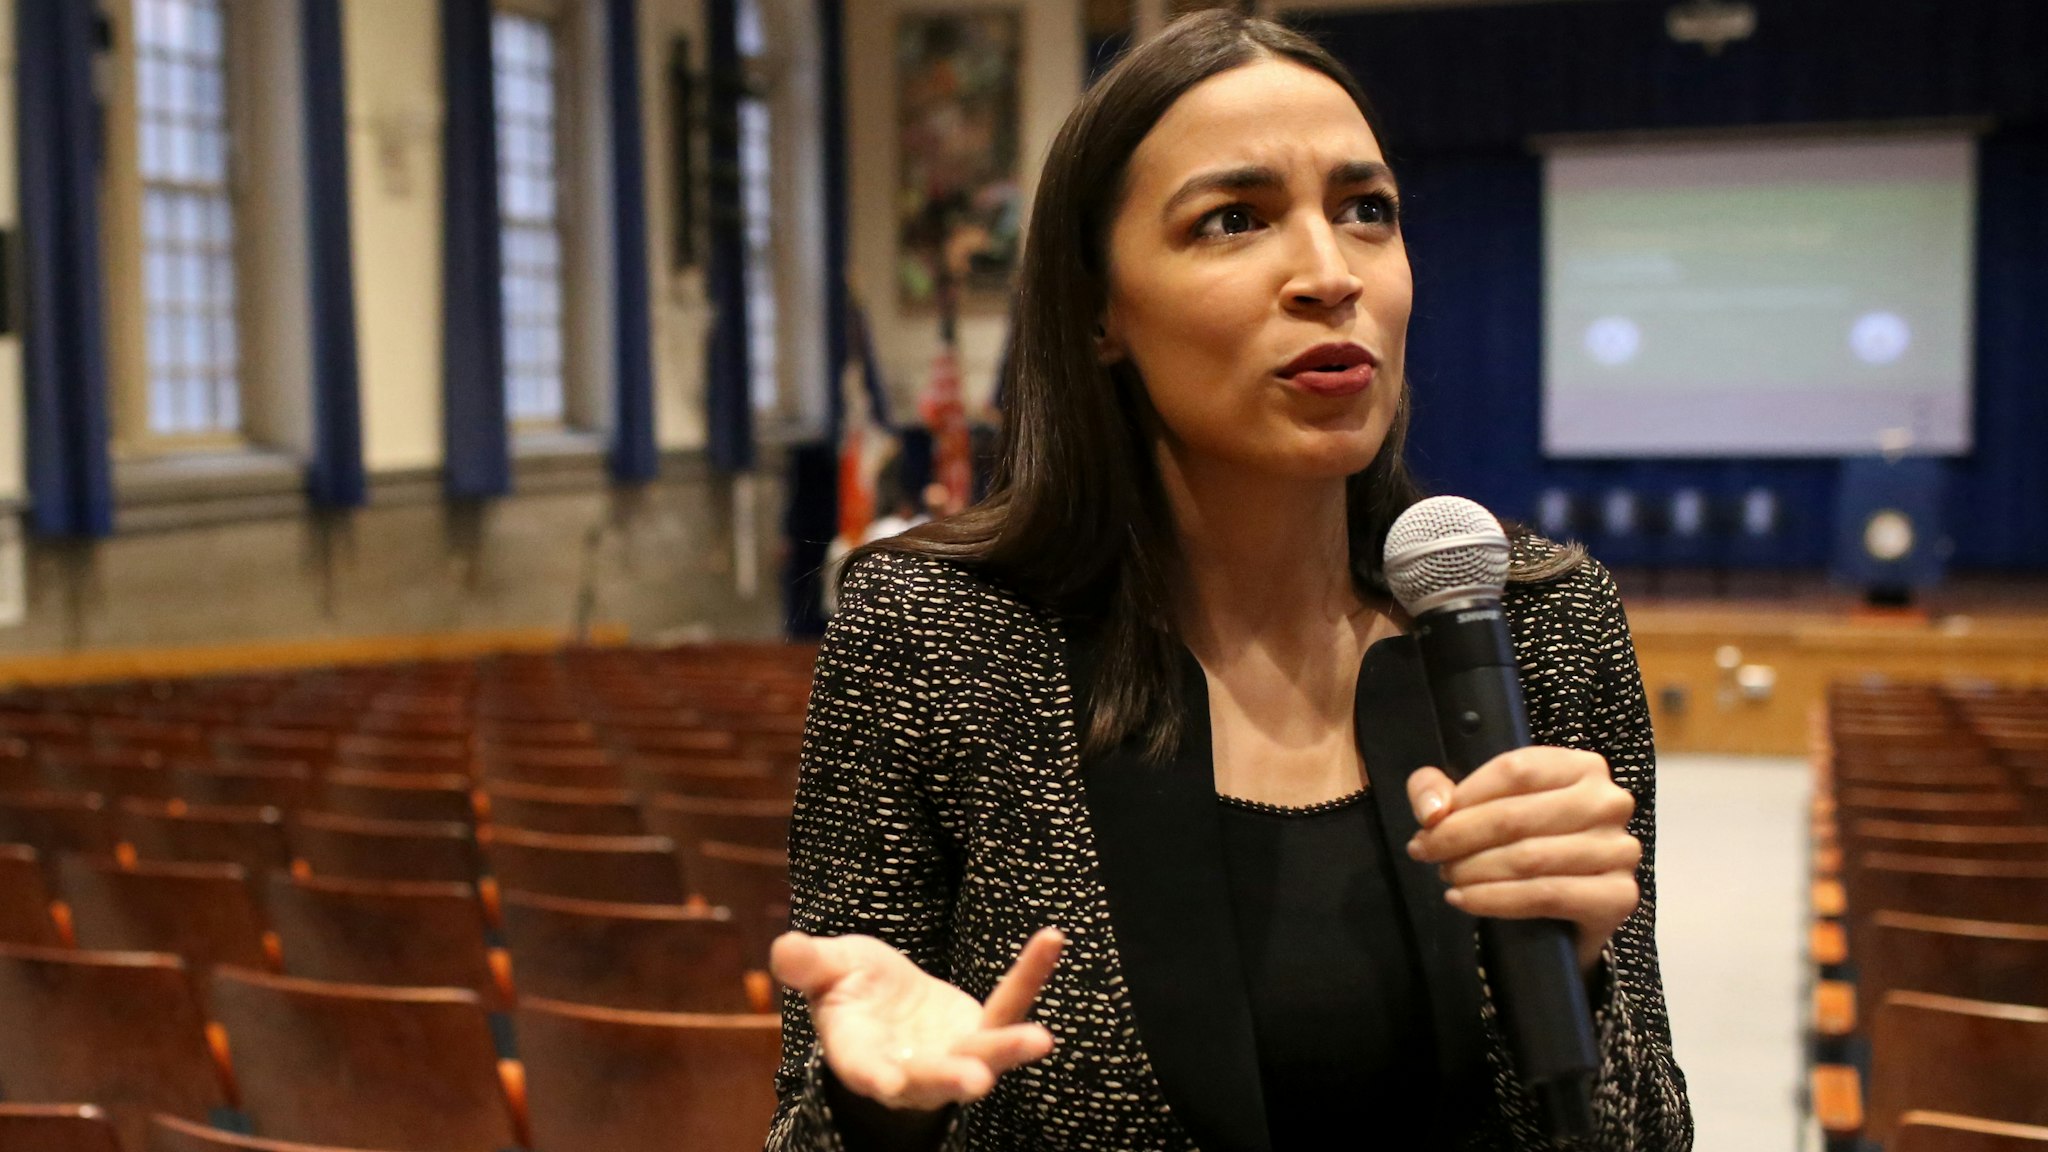 NEW YORK, NY - DECEMBER 14: U.S. Rep. Alexandria Ocasio-Cortez (D-NY) speaks with members of the media before a Green New Deal For Public Housing Town Hall on December 14, 2019 in the Queens borough of New York City. Ocasio-Cortez and Sen. Bernie Sanders (I-VT) have introduced a Green New Deal for Public Housing Act that would commit up to $180 billion over 10 years to upgrading 1.2 million federally administered homes.